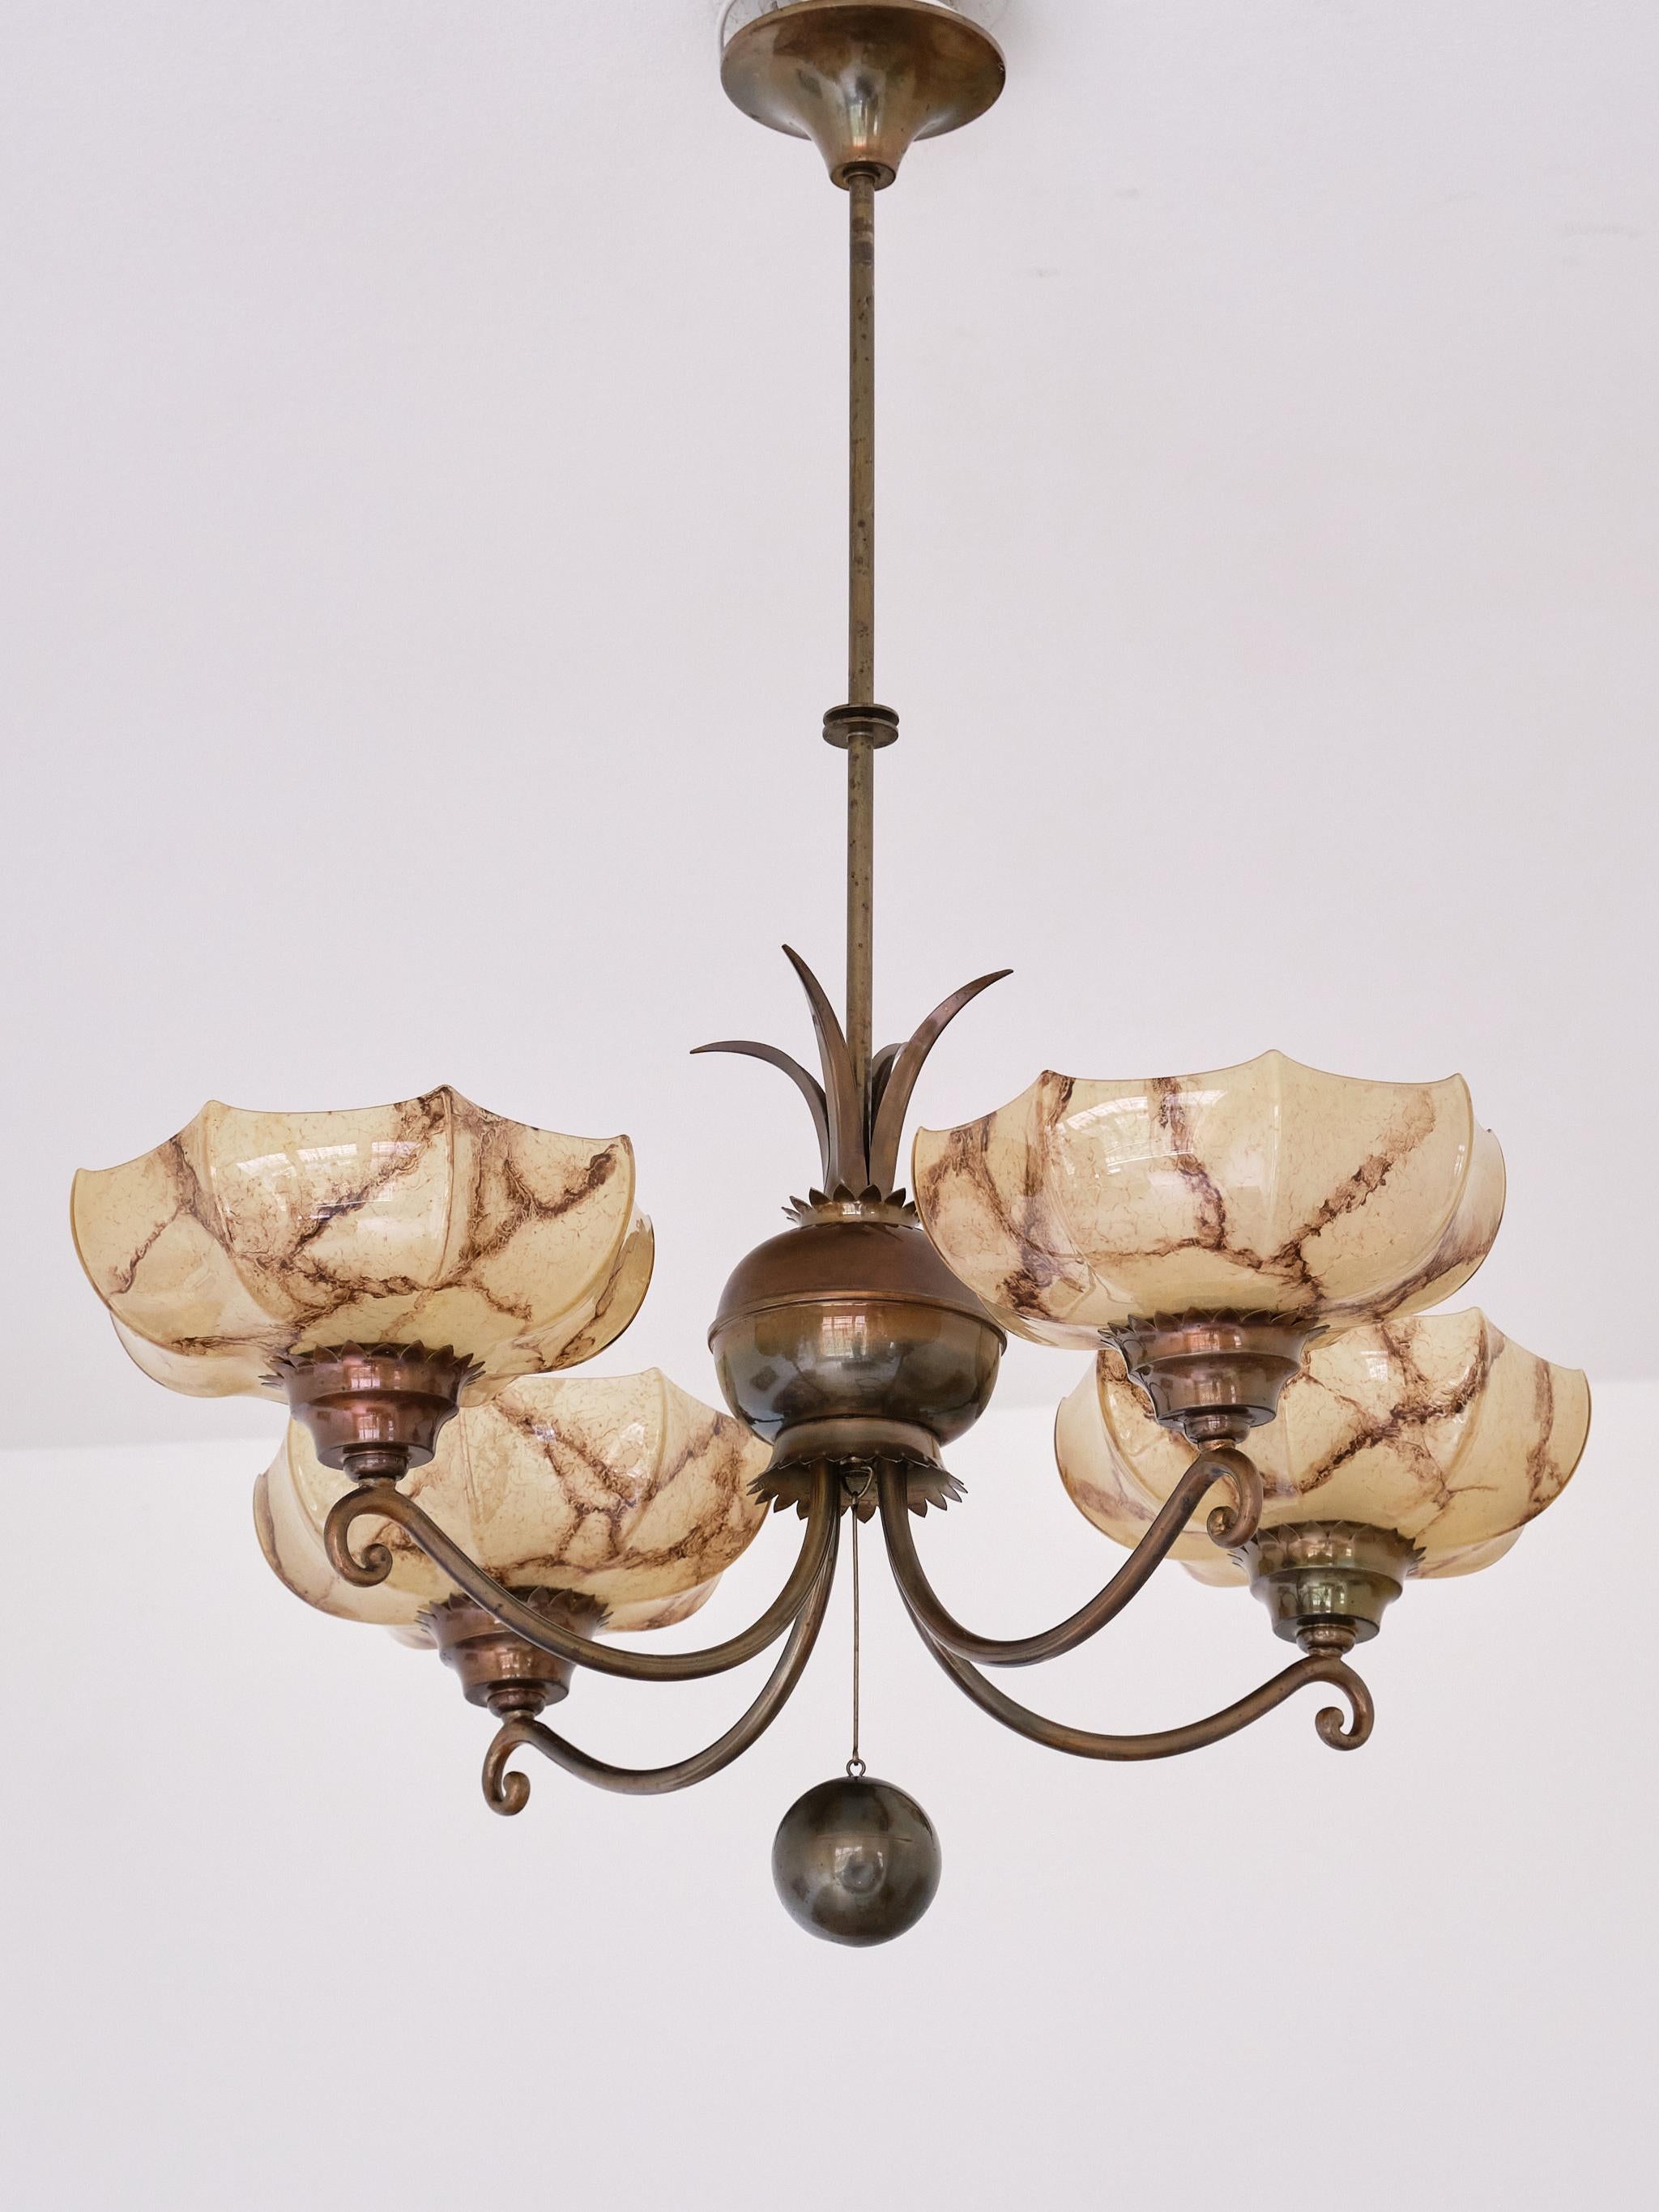 Harald Notini Chandelier in Brass and Marbled Glass, Böhlmarks, Sweden, 1927 For Sale 1